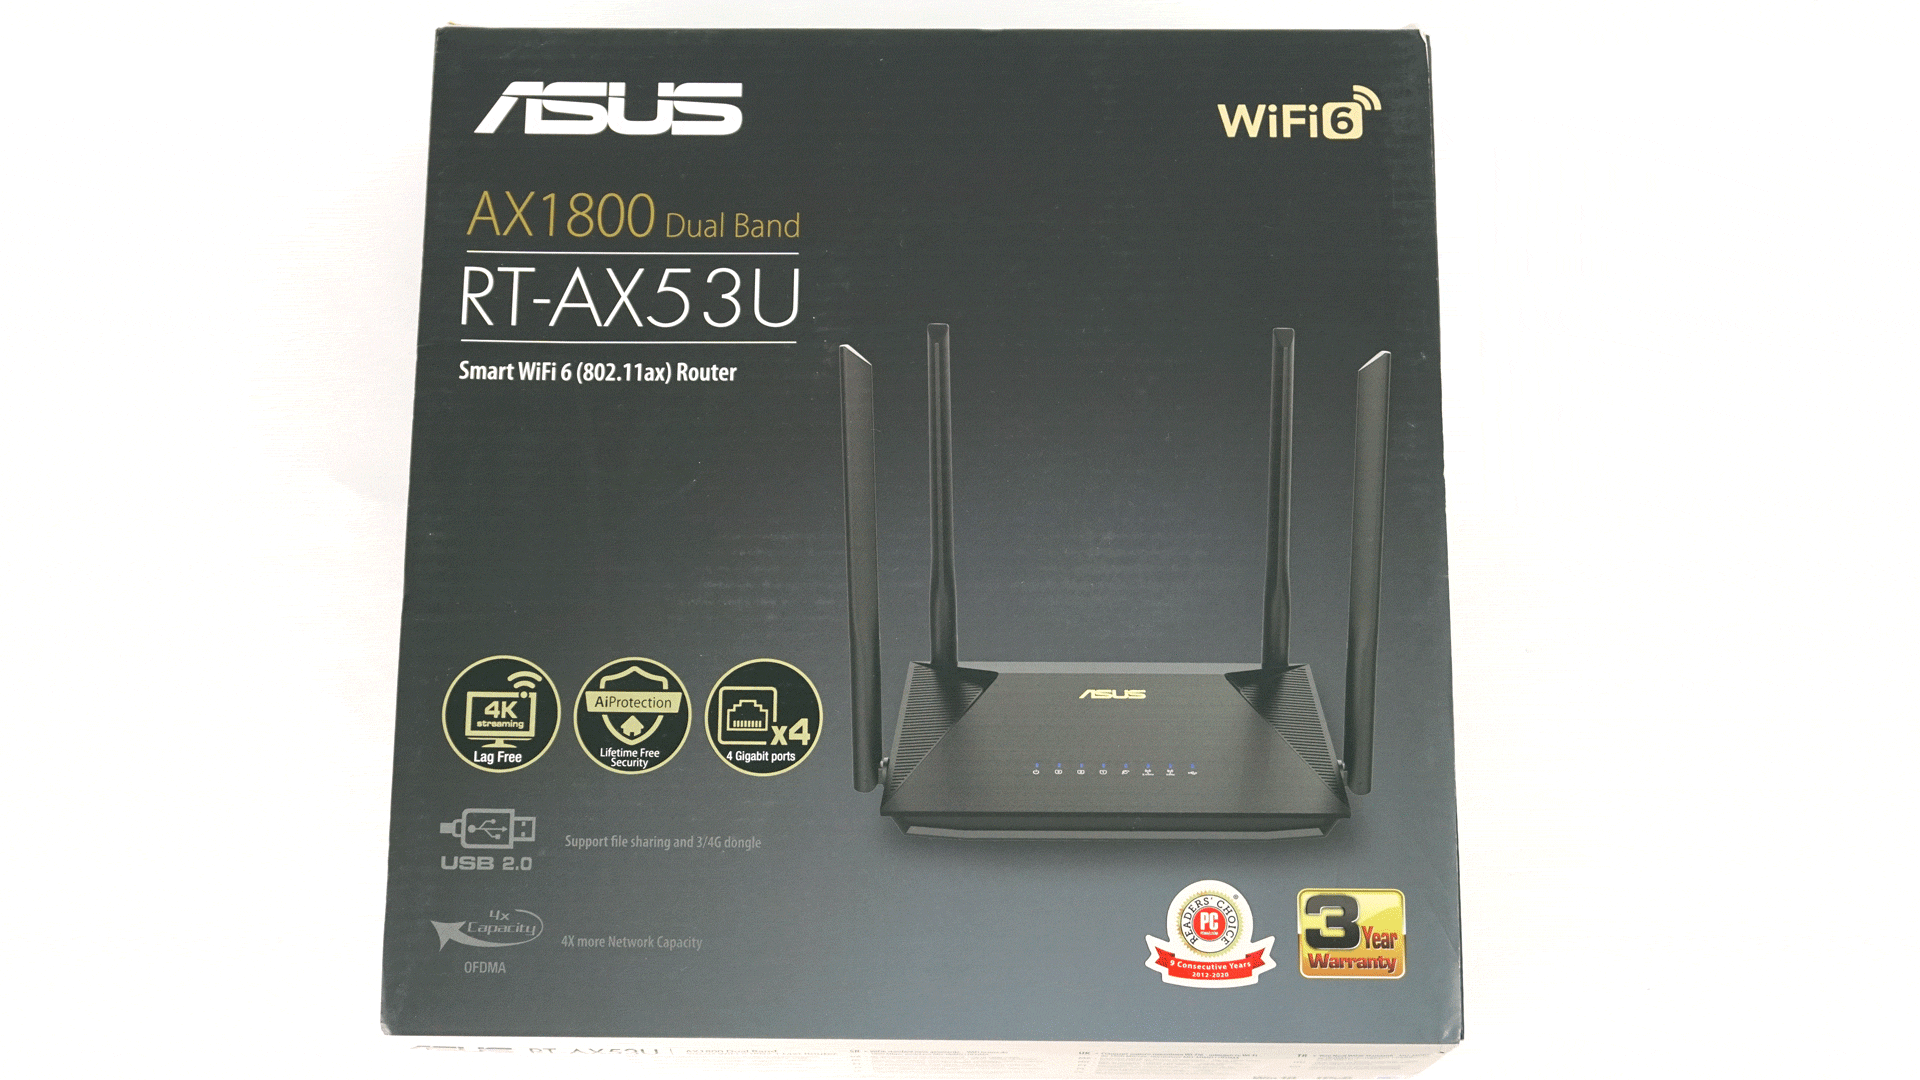 RT-AX53U: WiFi 6 Asus Cheap masses router in for or test, the